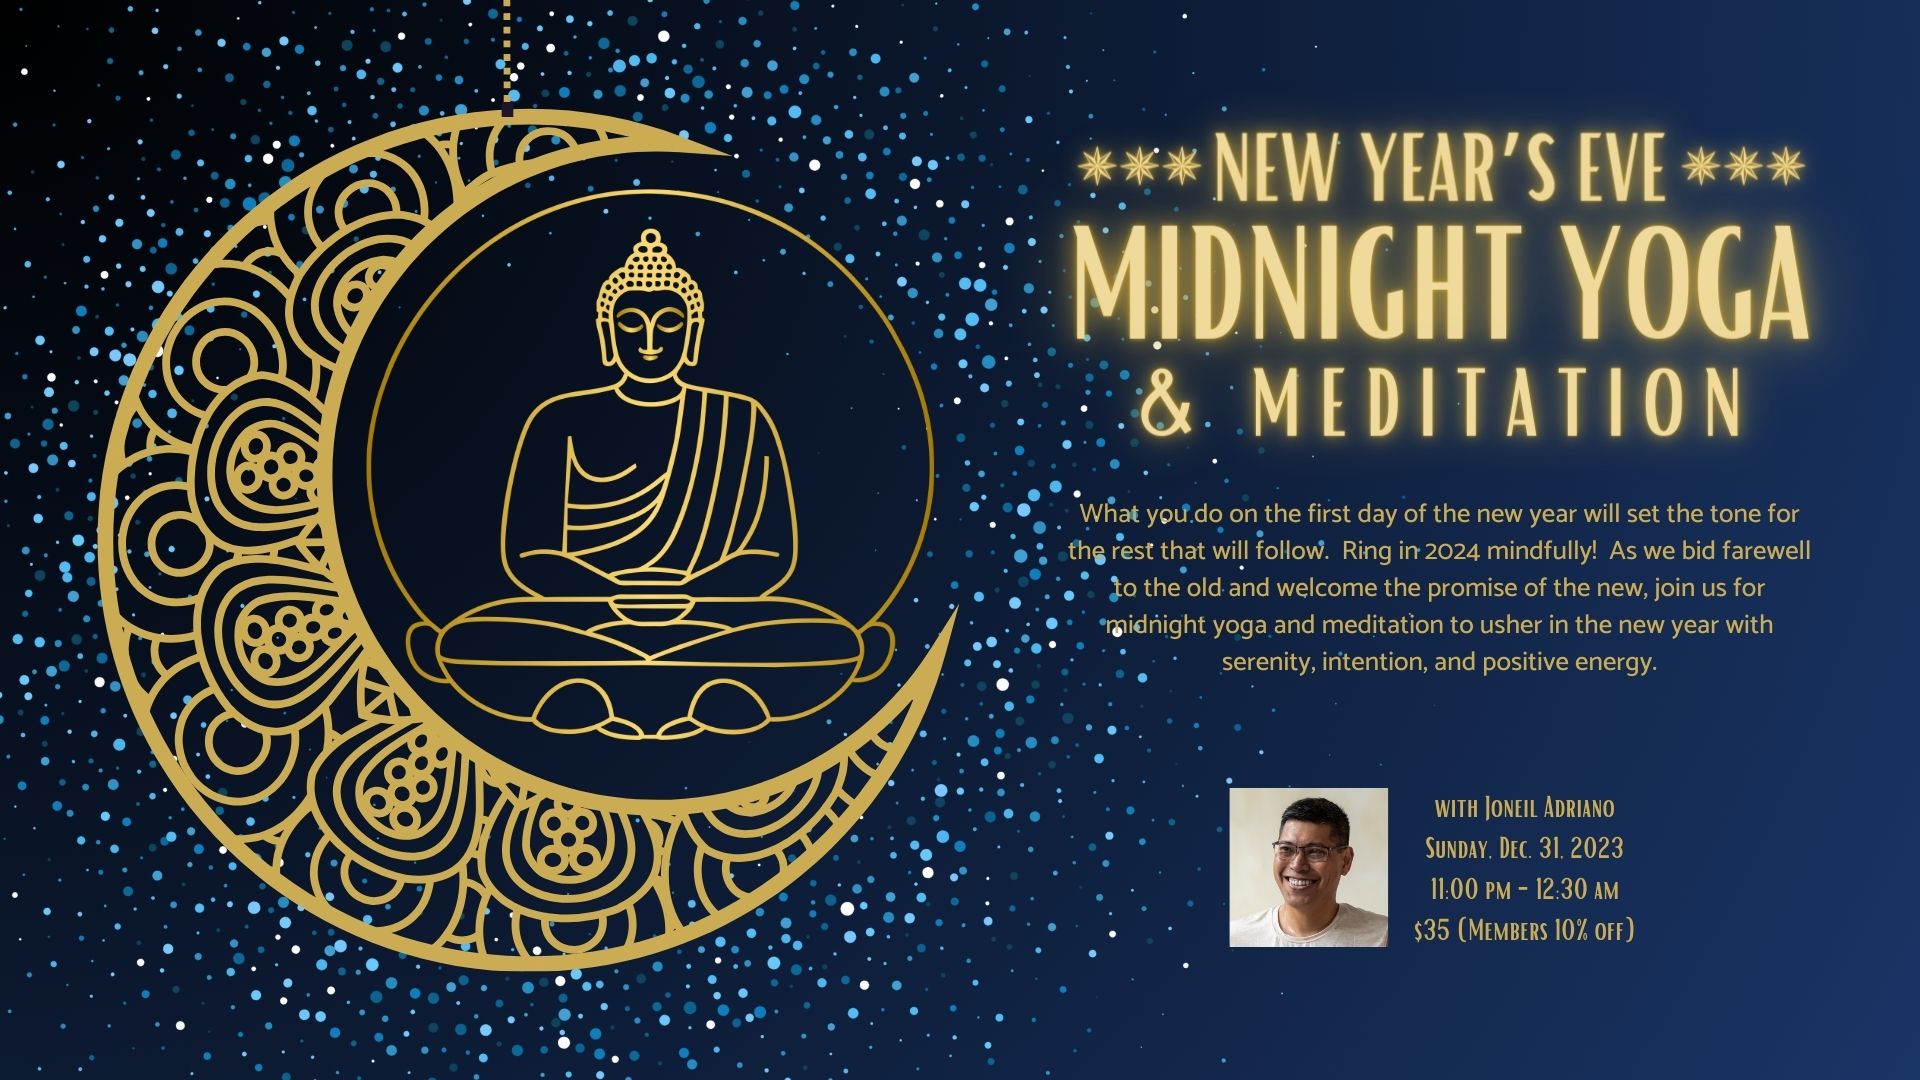 Flyer for a midnight yoga event on New Year's Eve